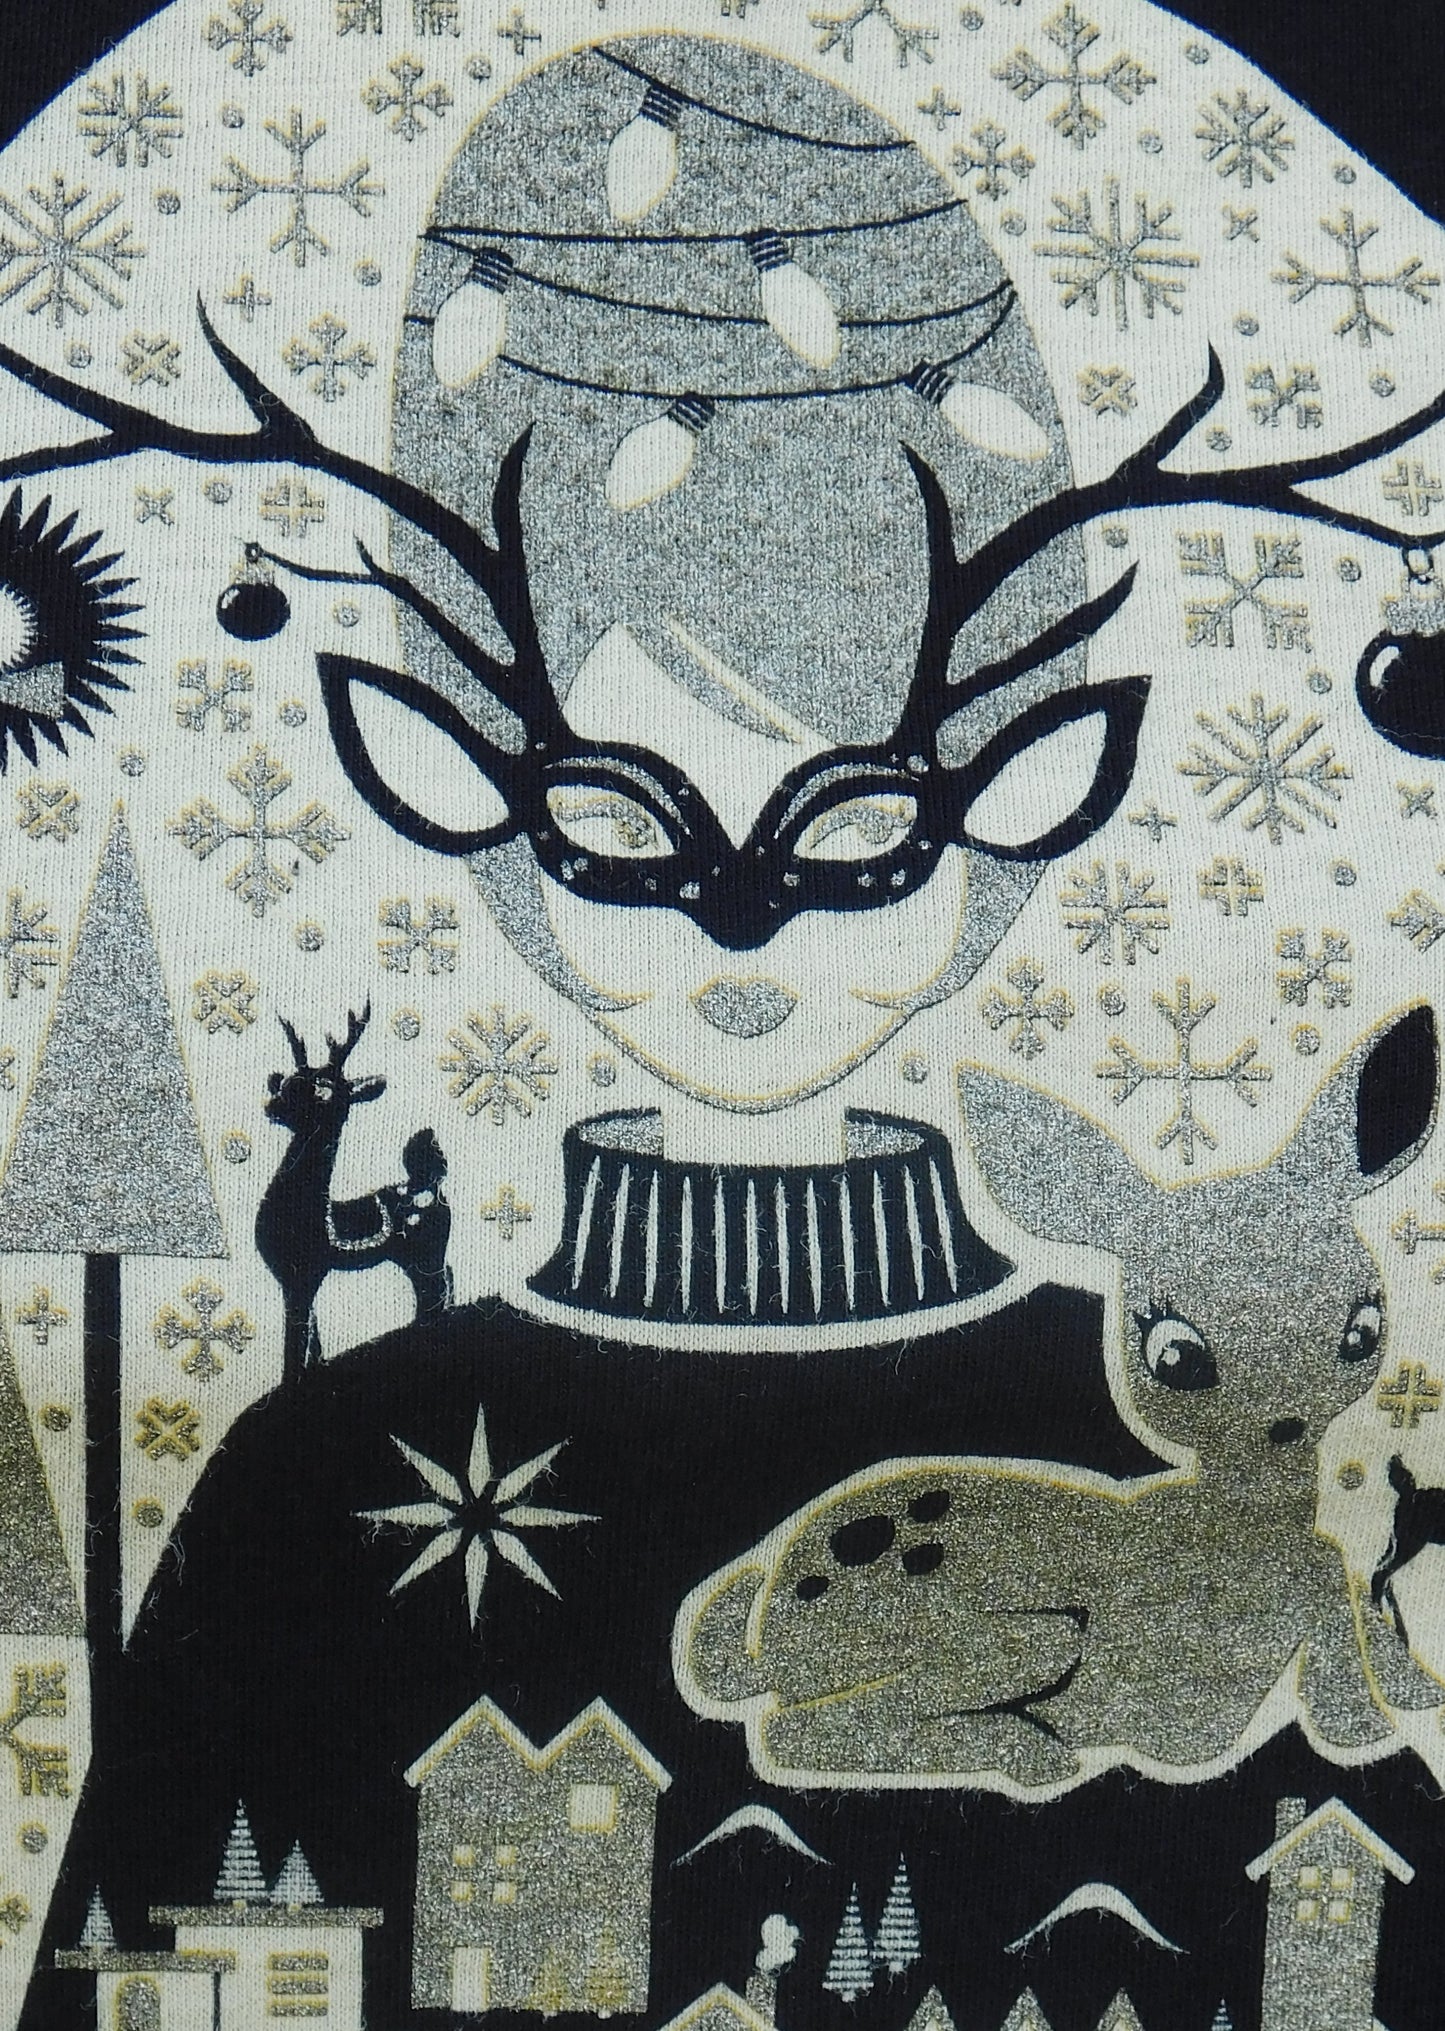 Closeup of gold, black and white design of masked girl with antlers, deer, and snowflakes